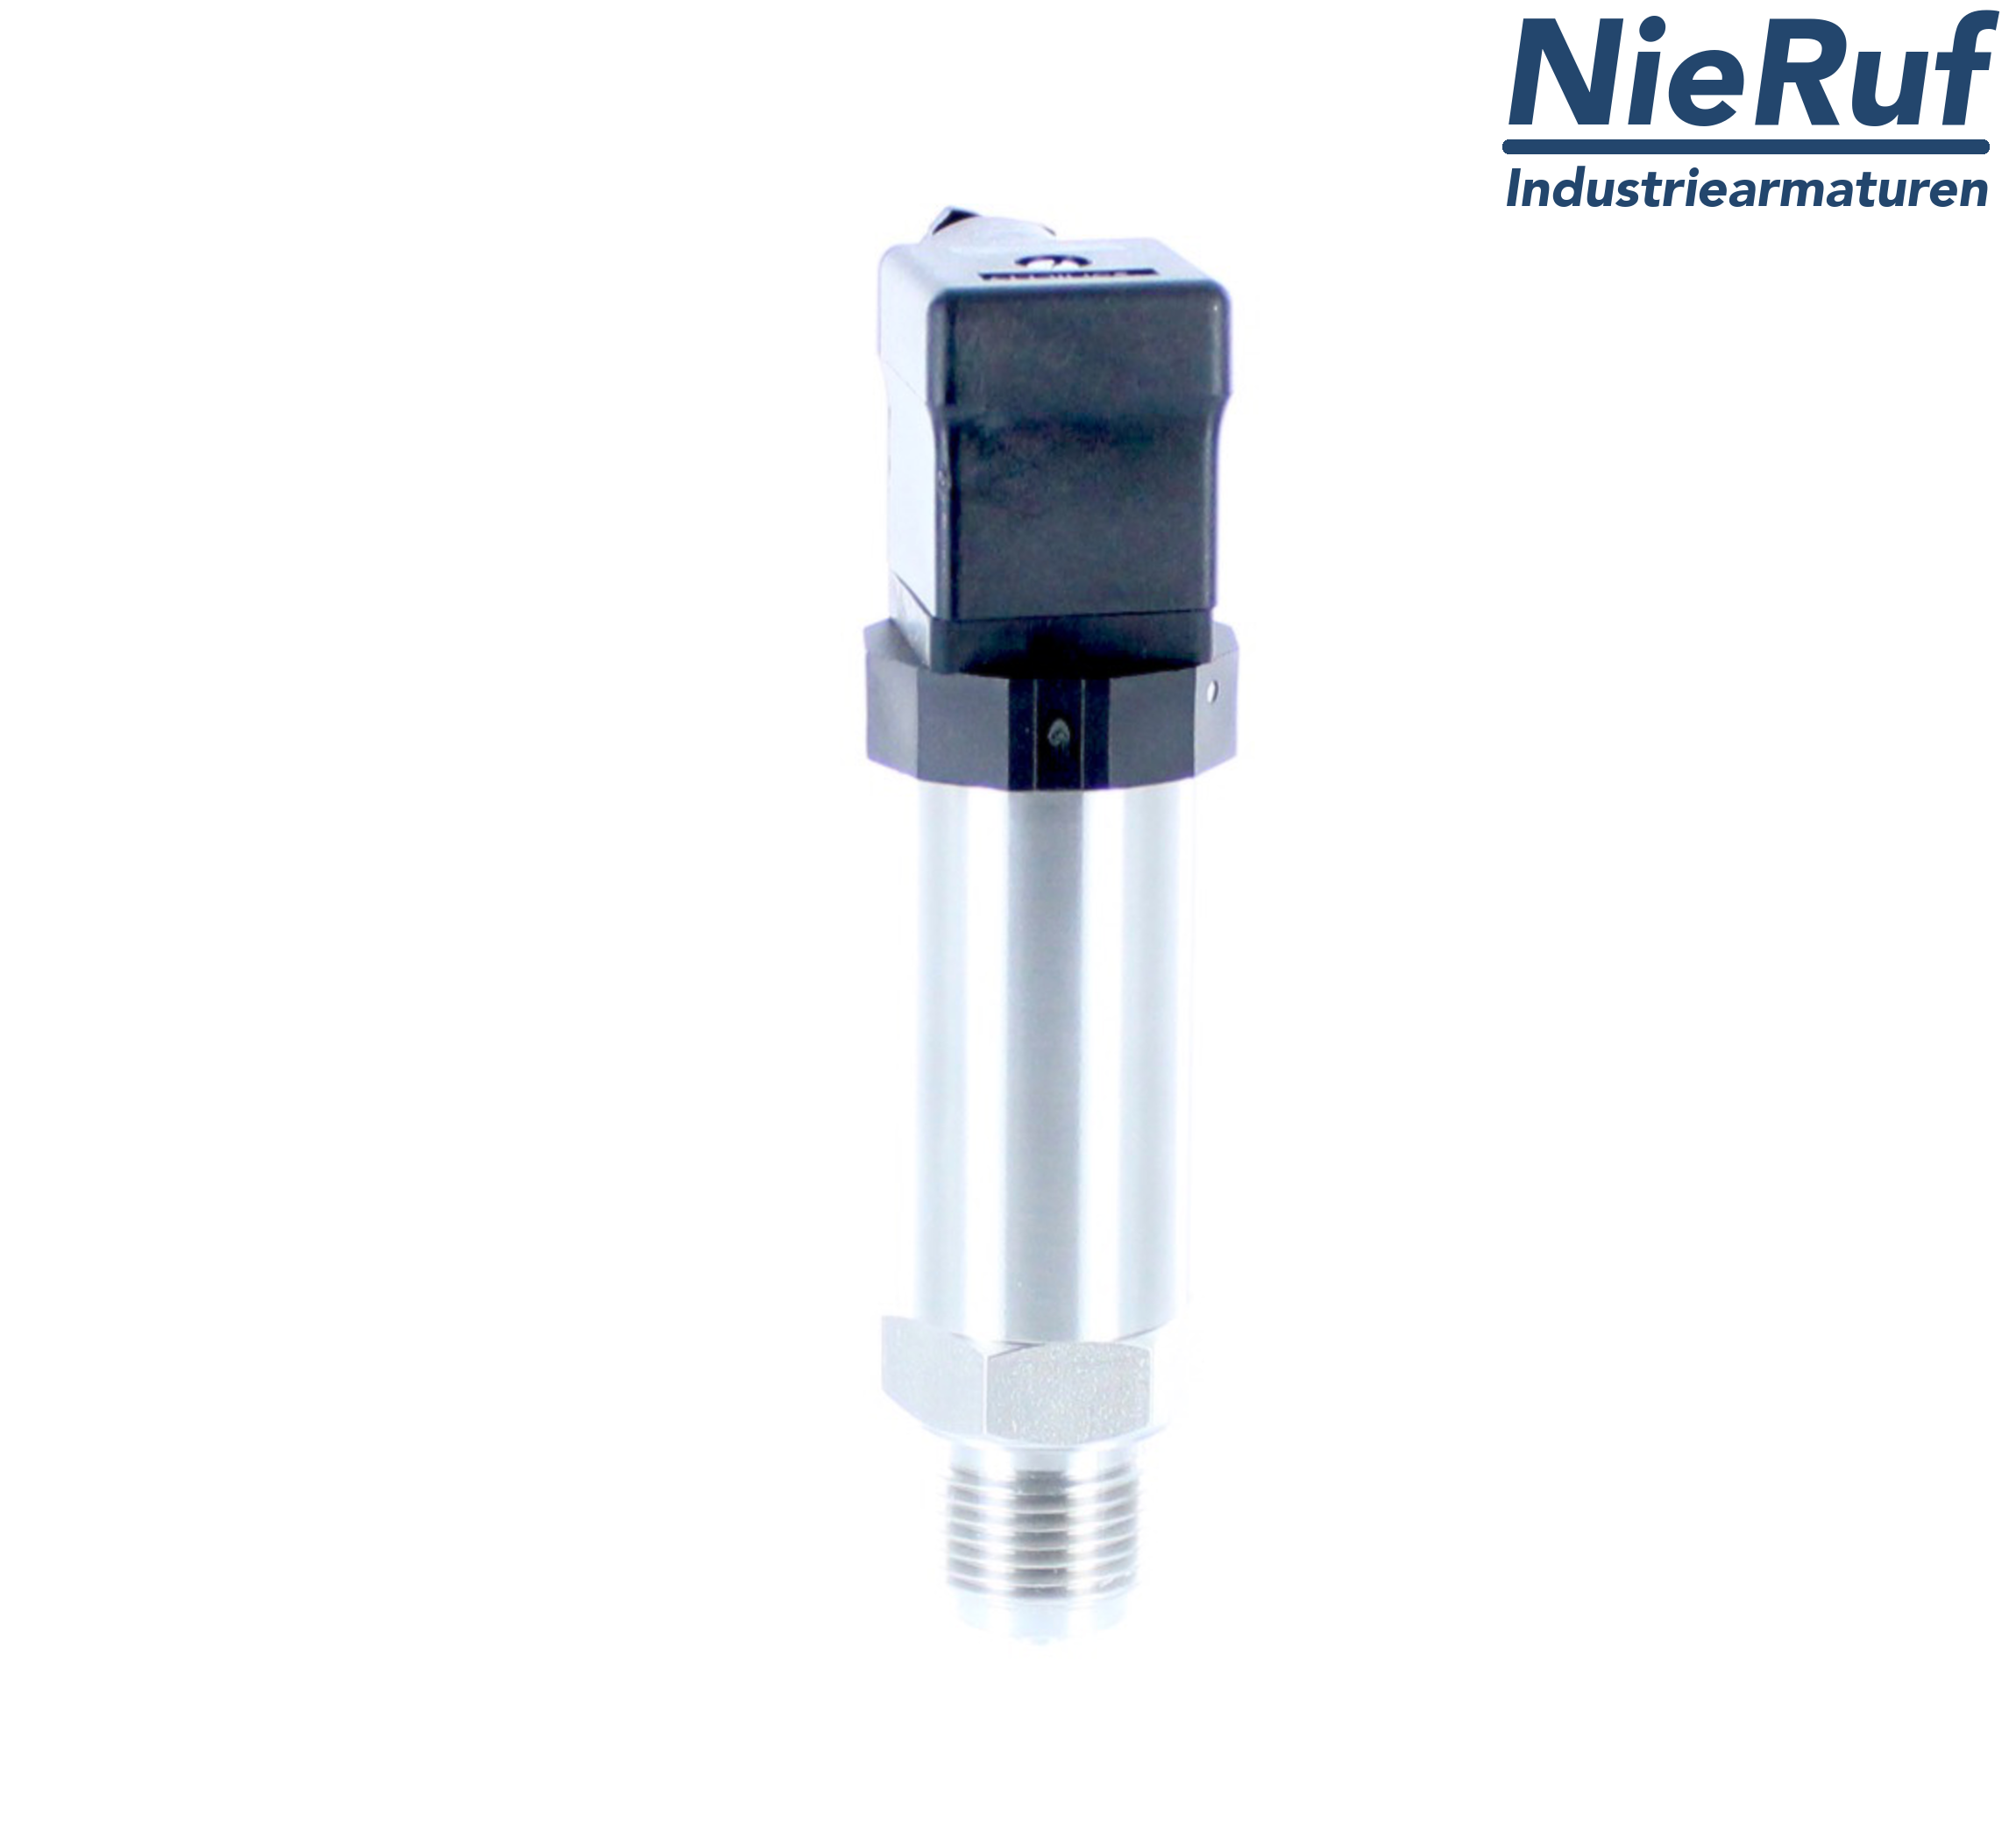 pressure sensor G 1/4" B DS01 stainless steel 2-wire: 4-20mA FPM 0,0 - 320,0 bar